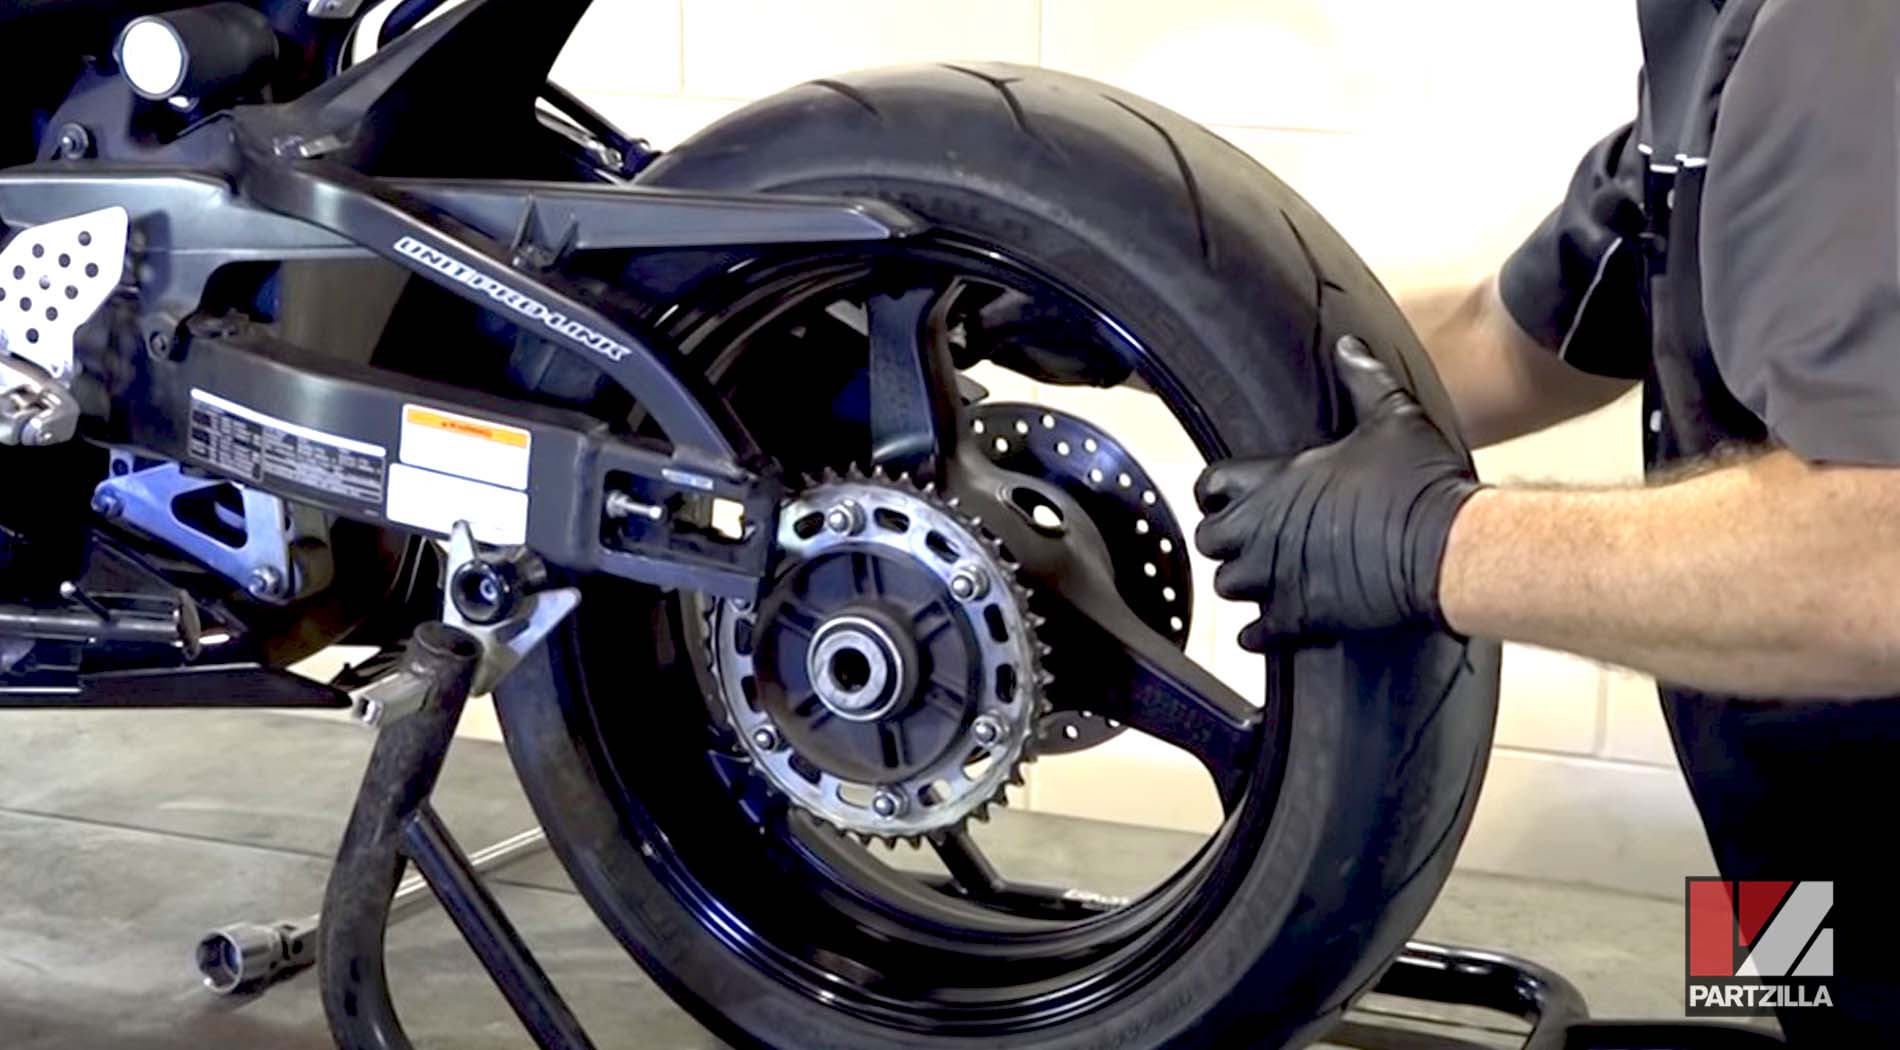 Honda CBR600RR chain and sprockets change wheel removal